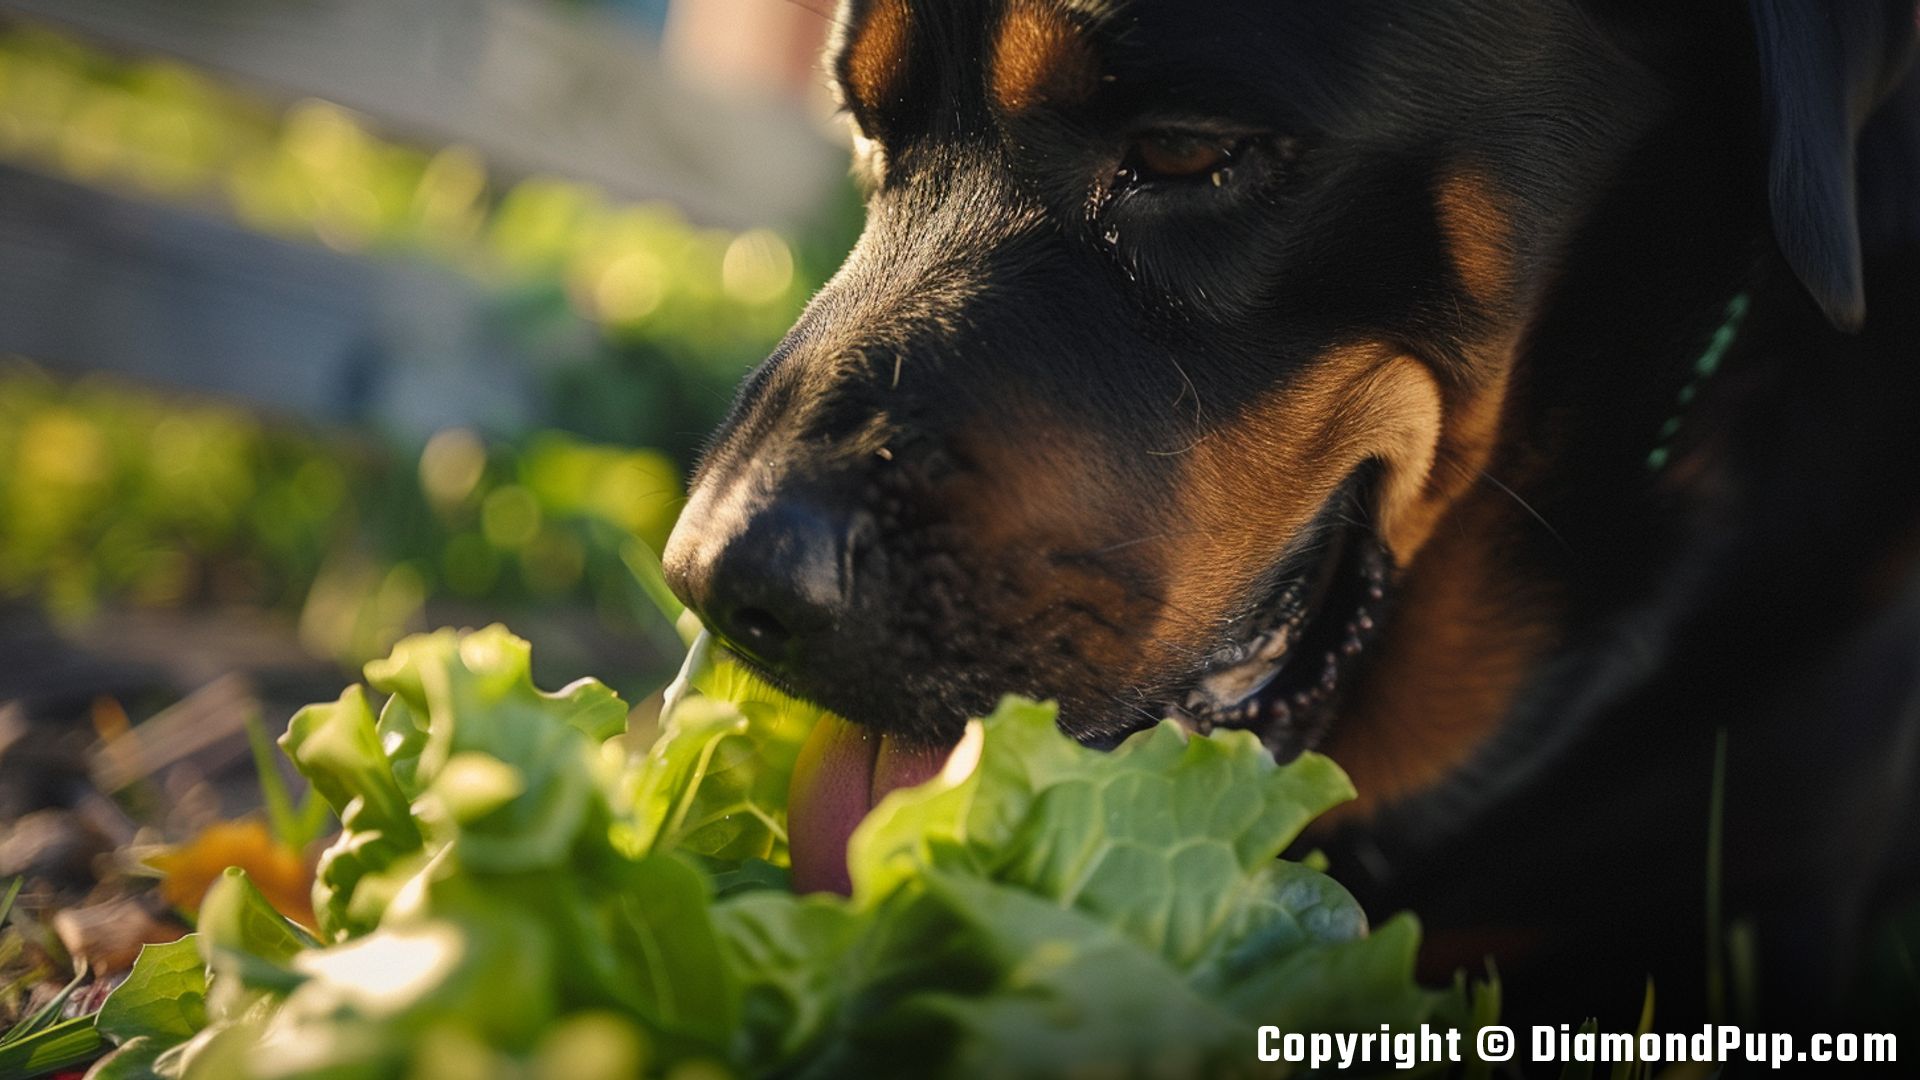 Image of a Cute Rottweiler Eating Lettuce